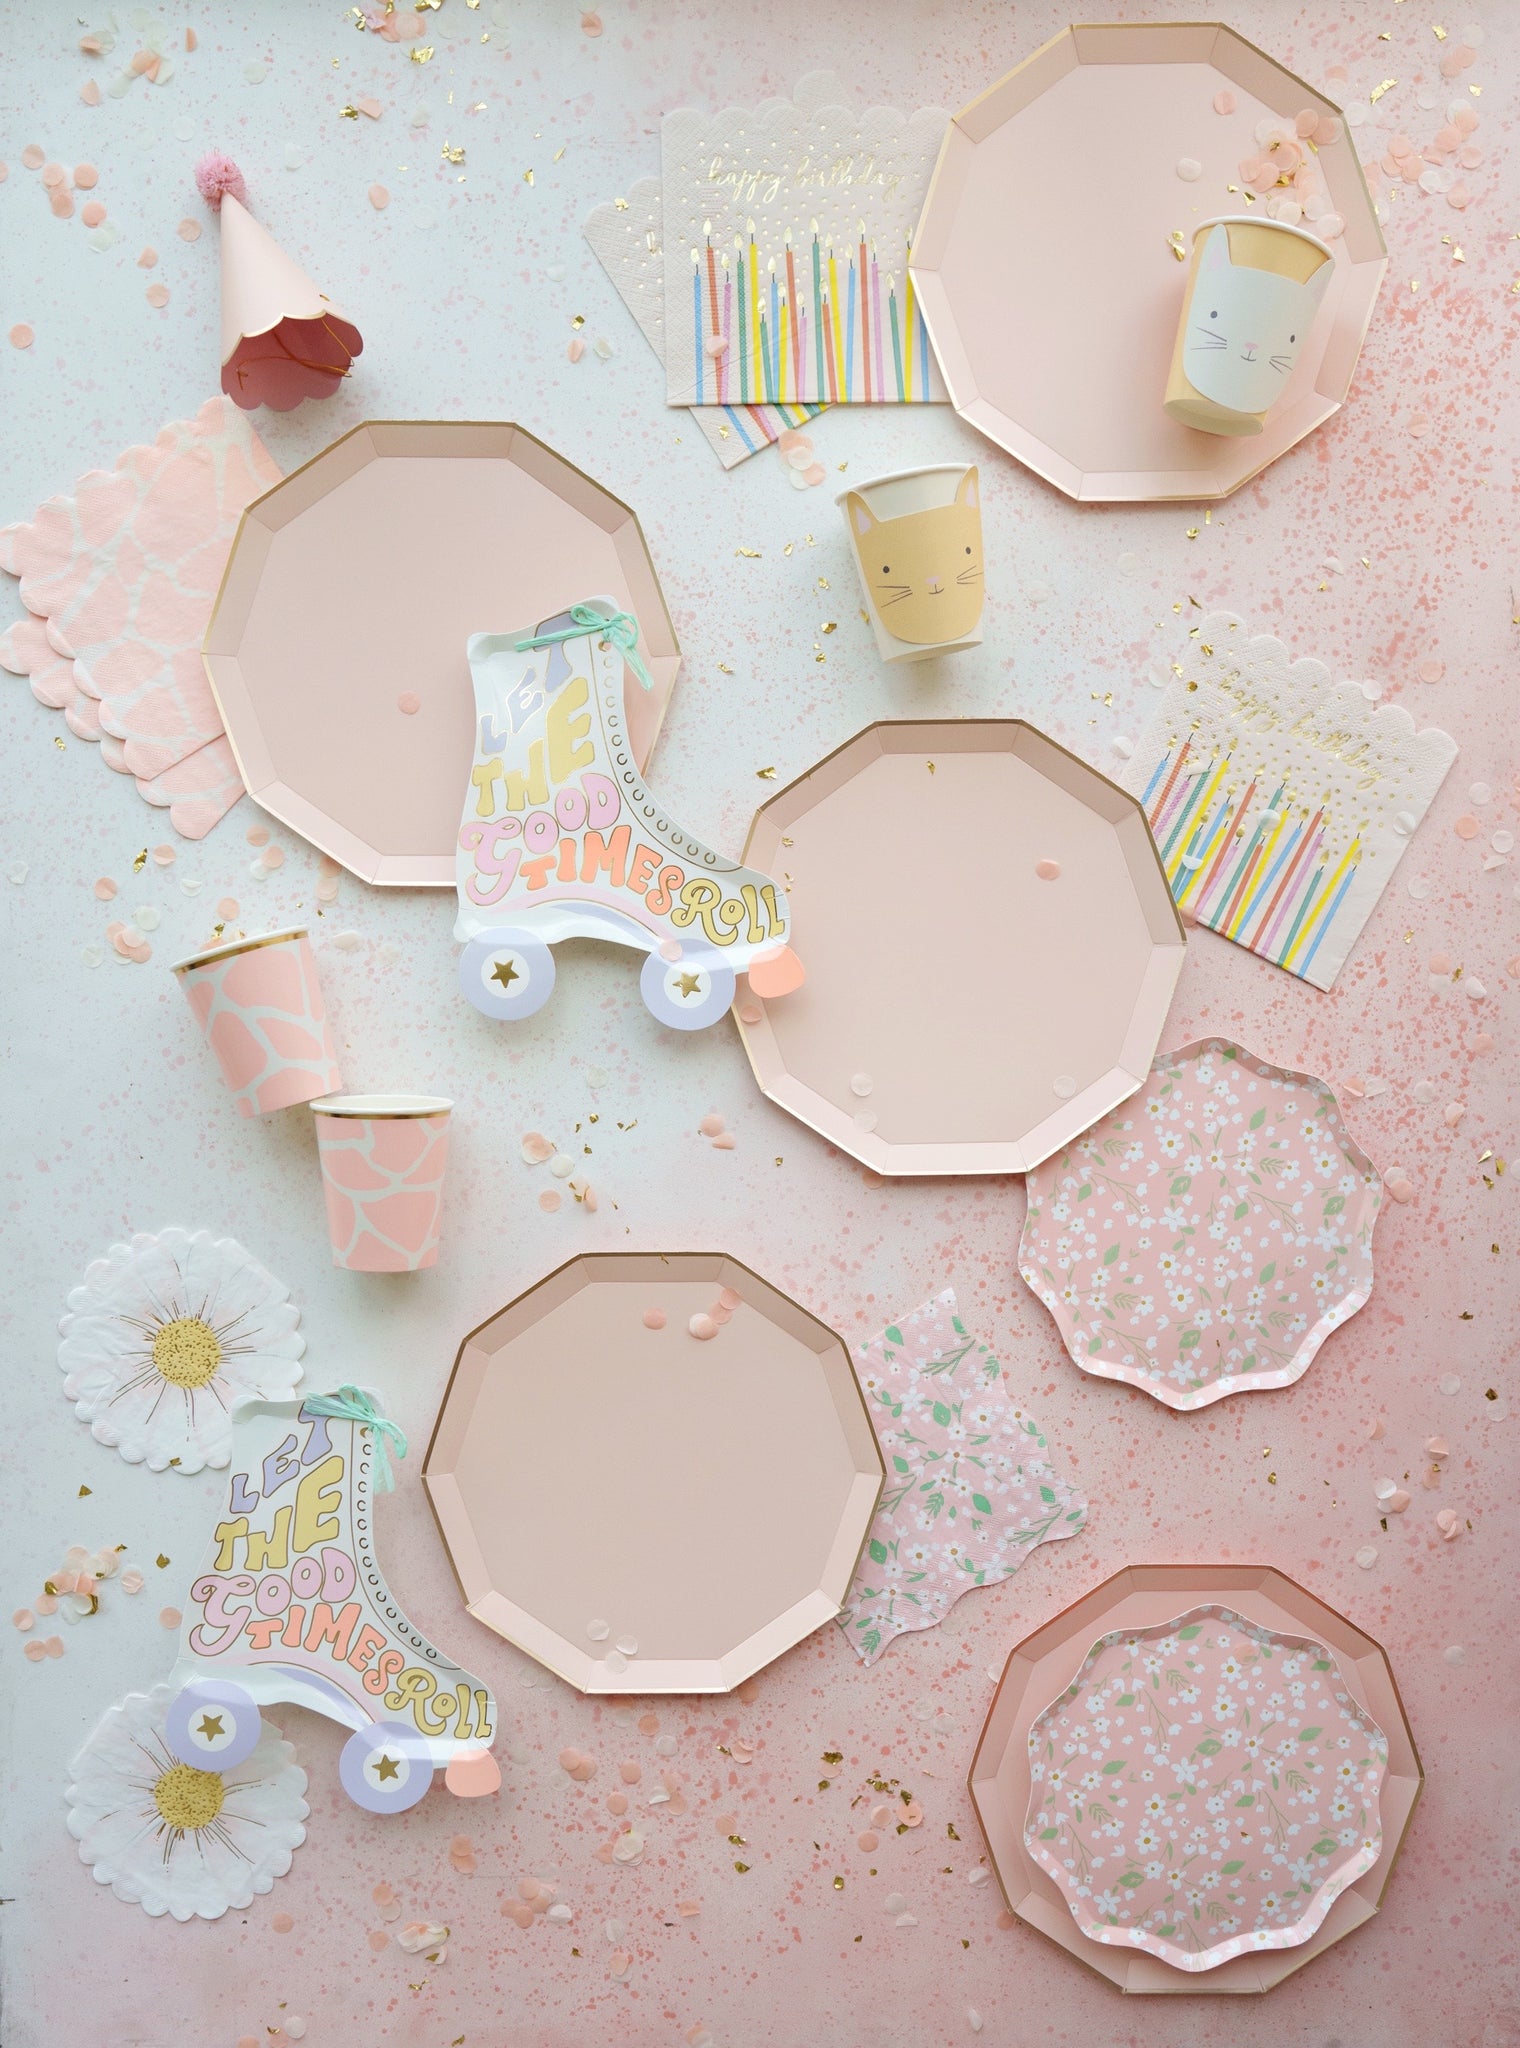 Peach party plates to use for a kitty party, rollerskate party, daisy party, bridal shower, baby shower, or any occasion!